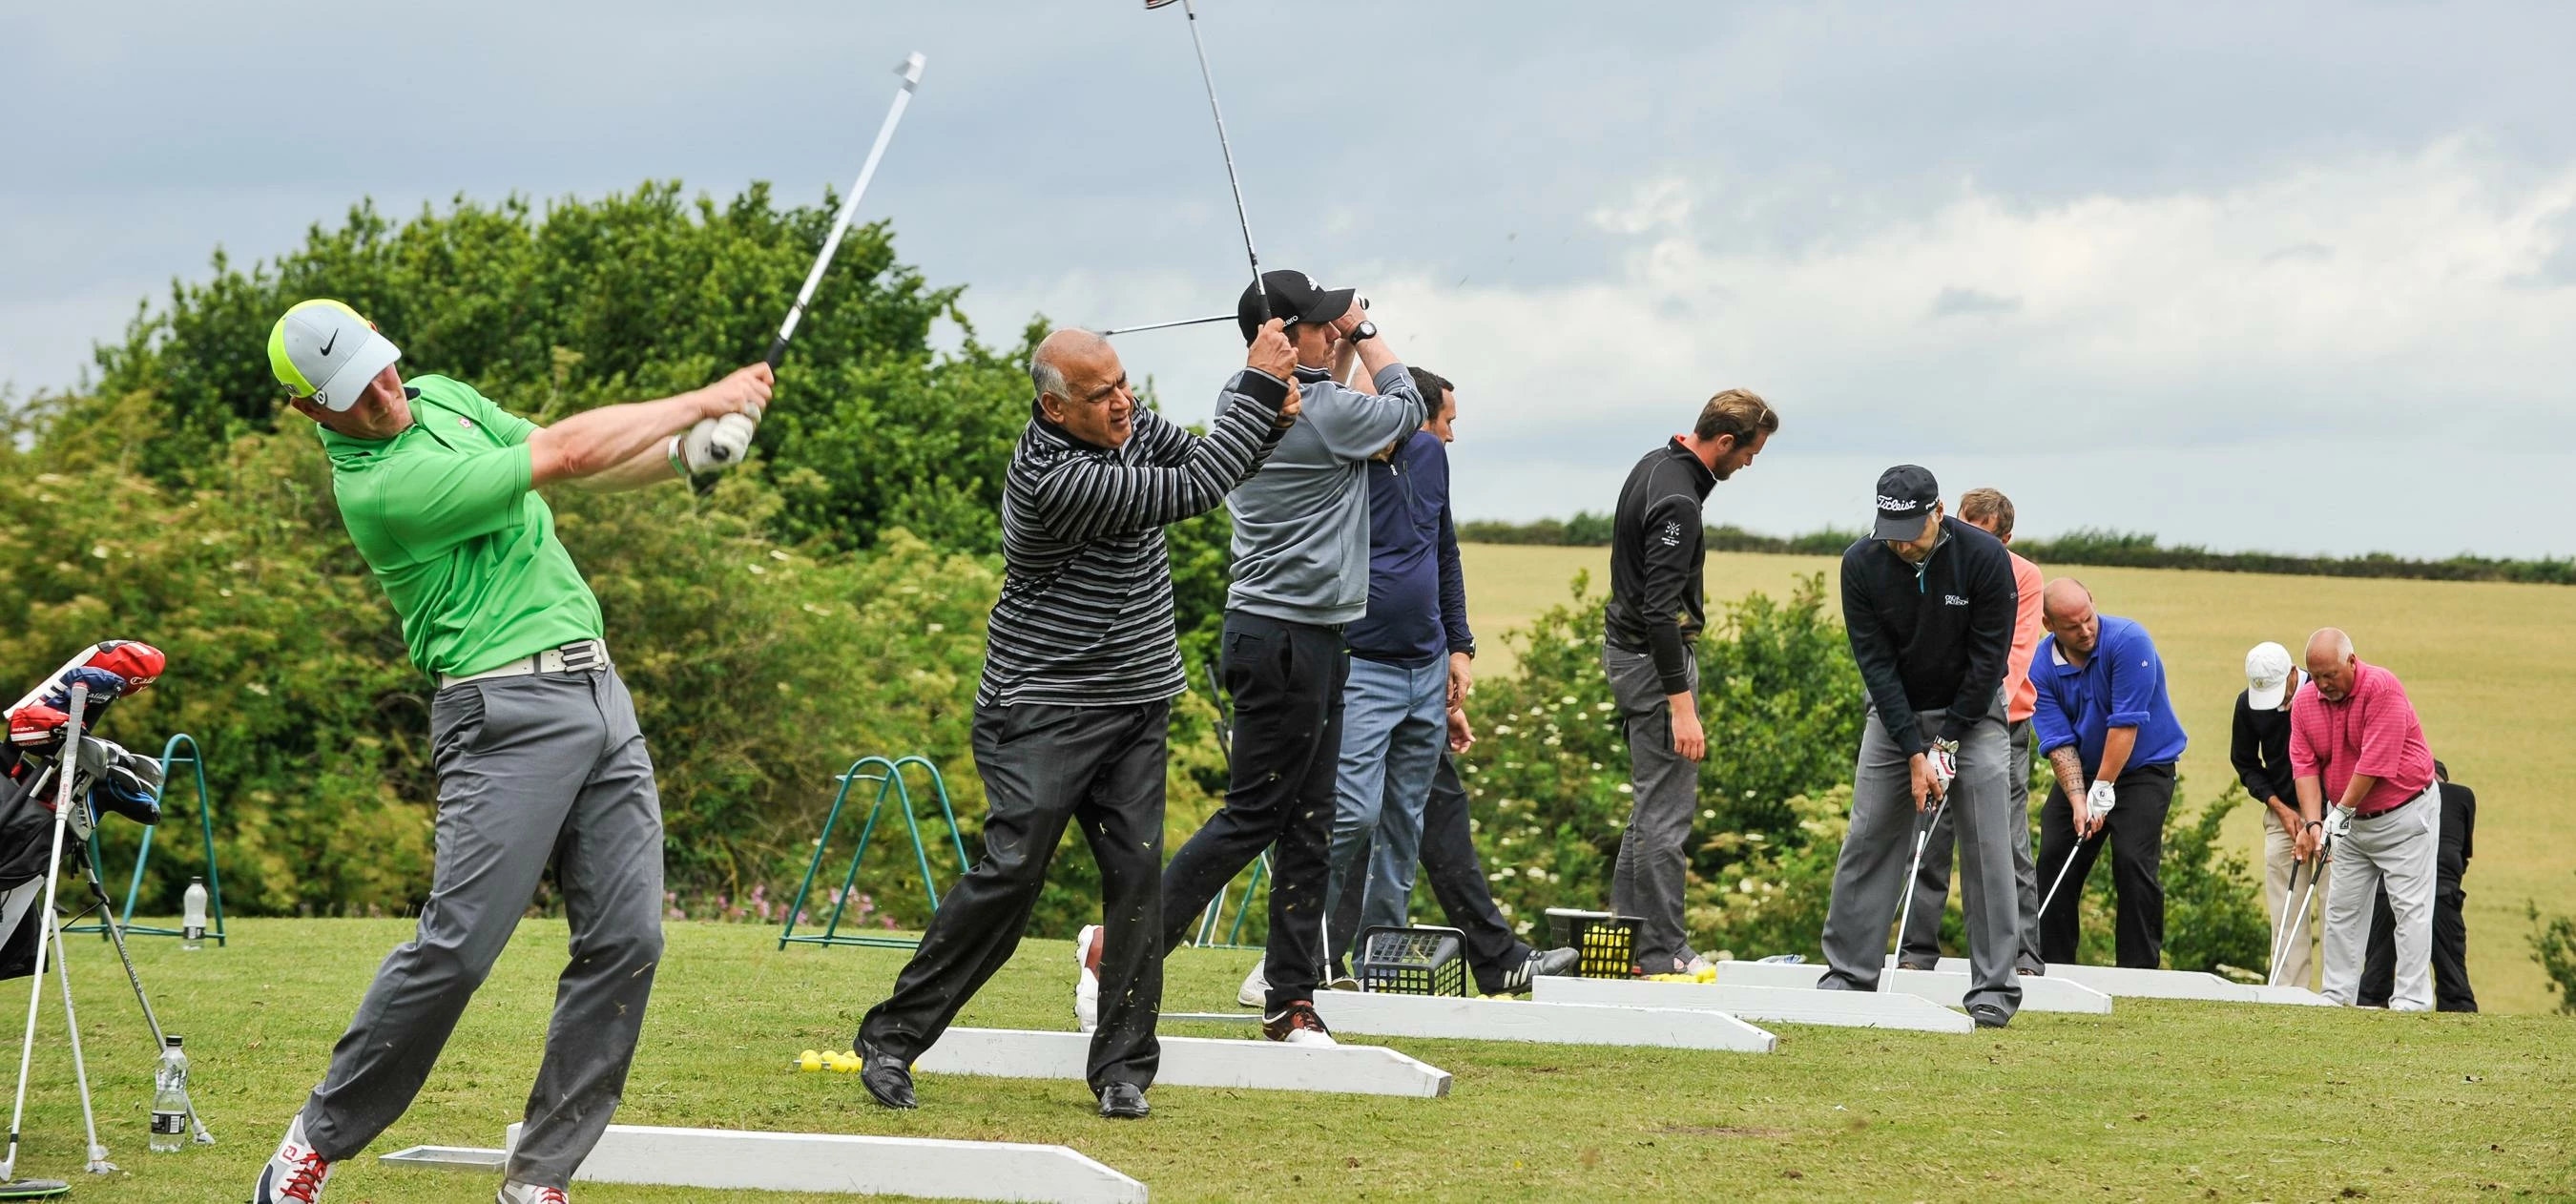 Leeds Golf Centre is renowned for its first class instructors